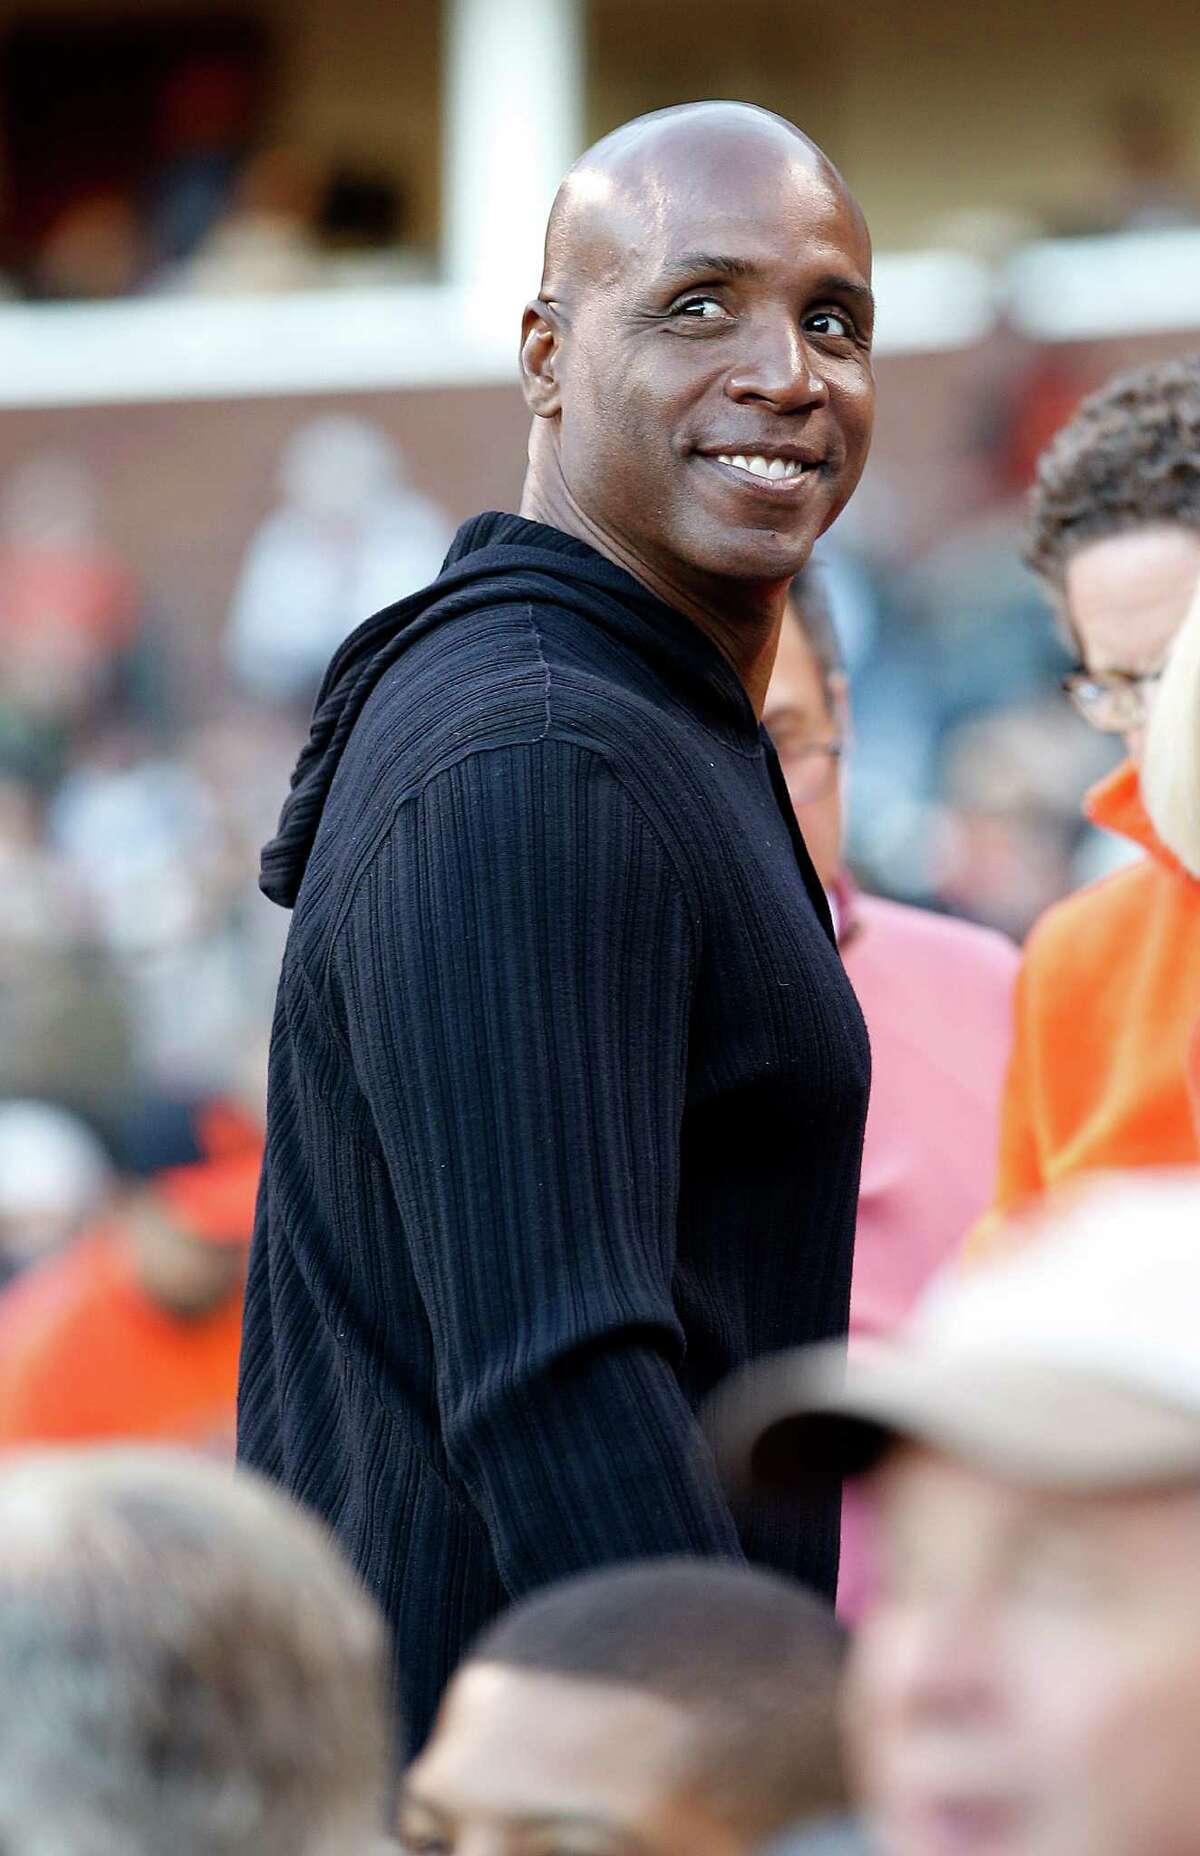 Former San Francisco Giants Barry Bonds watches the baseball game between the Giants and Padres in San Francisco, Monday, June 23, 2014. (AP Photo/Tony Avelar)